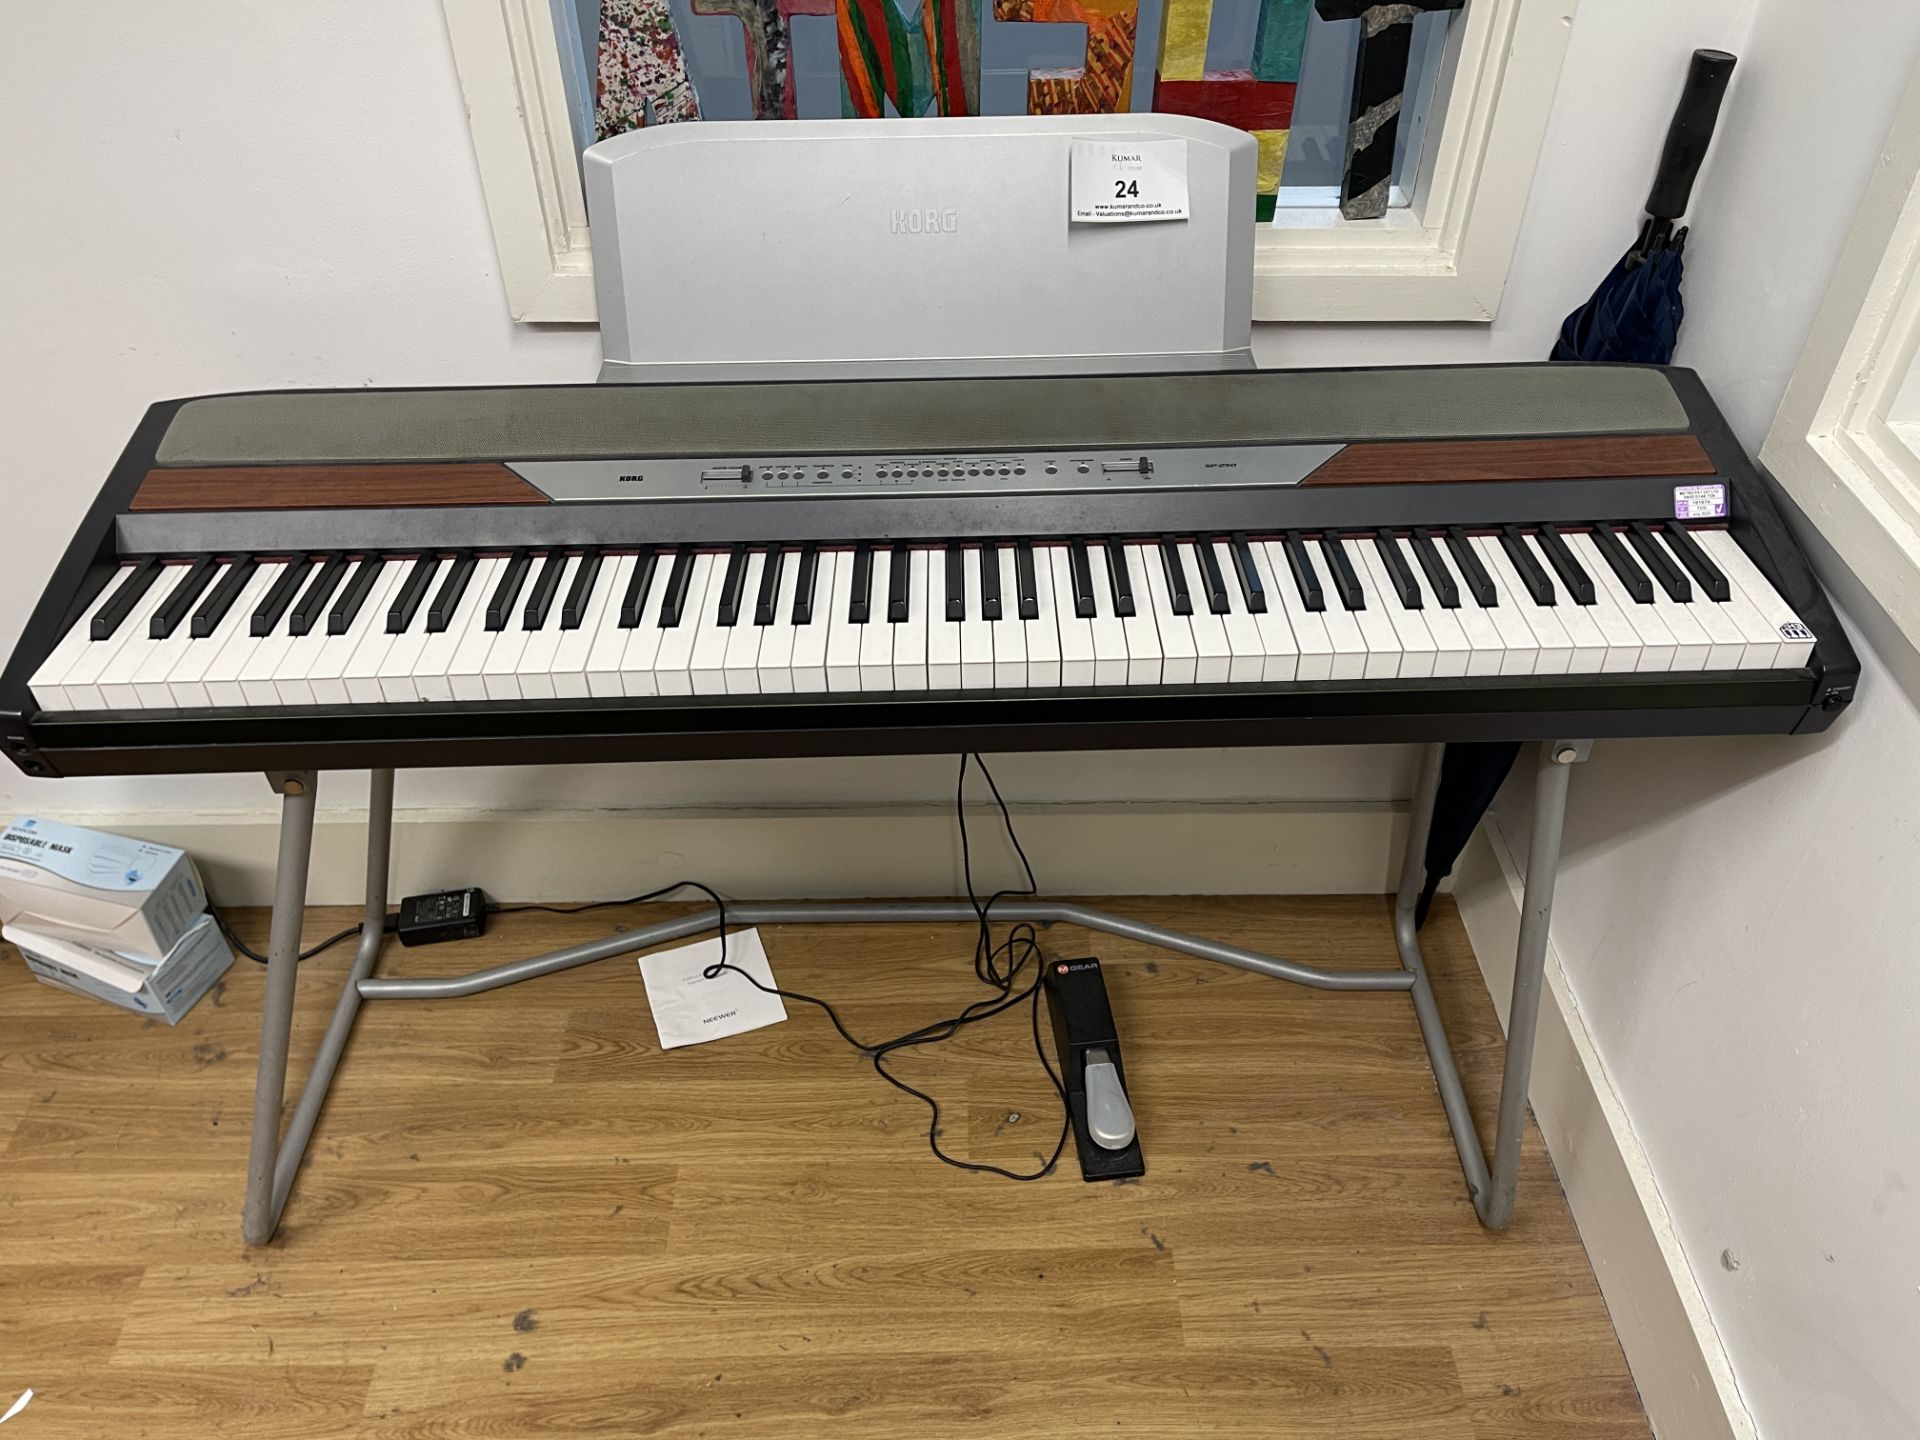 Korg SP -280 Digital Stage Piano complete with Stand, Seat and M-Gear Pedal (RRP £600)